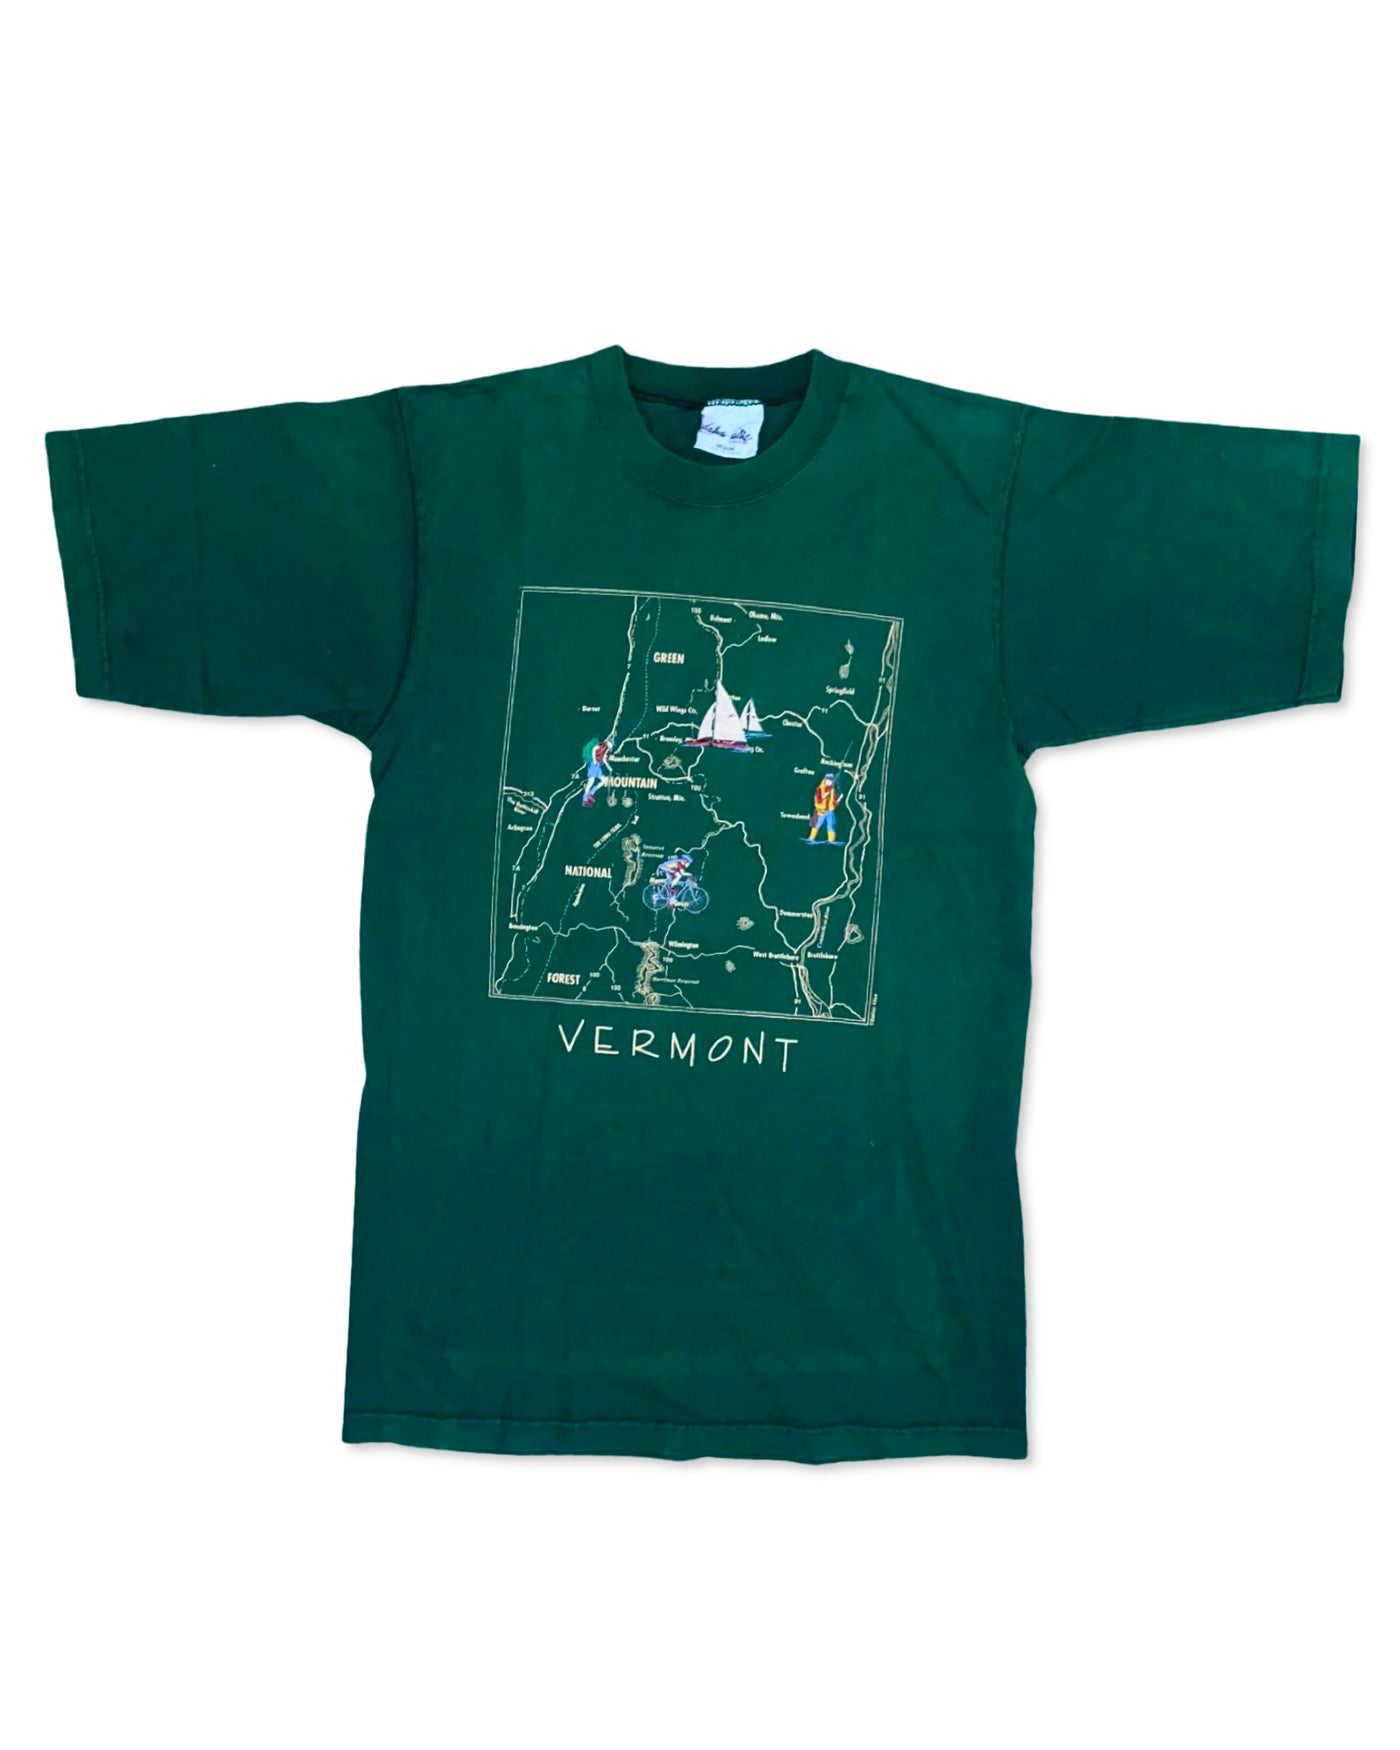 Vintage 90s Embroidered Vermont T-Shirt